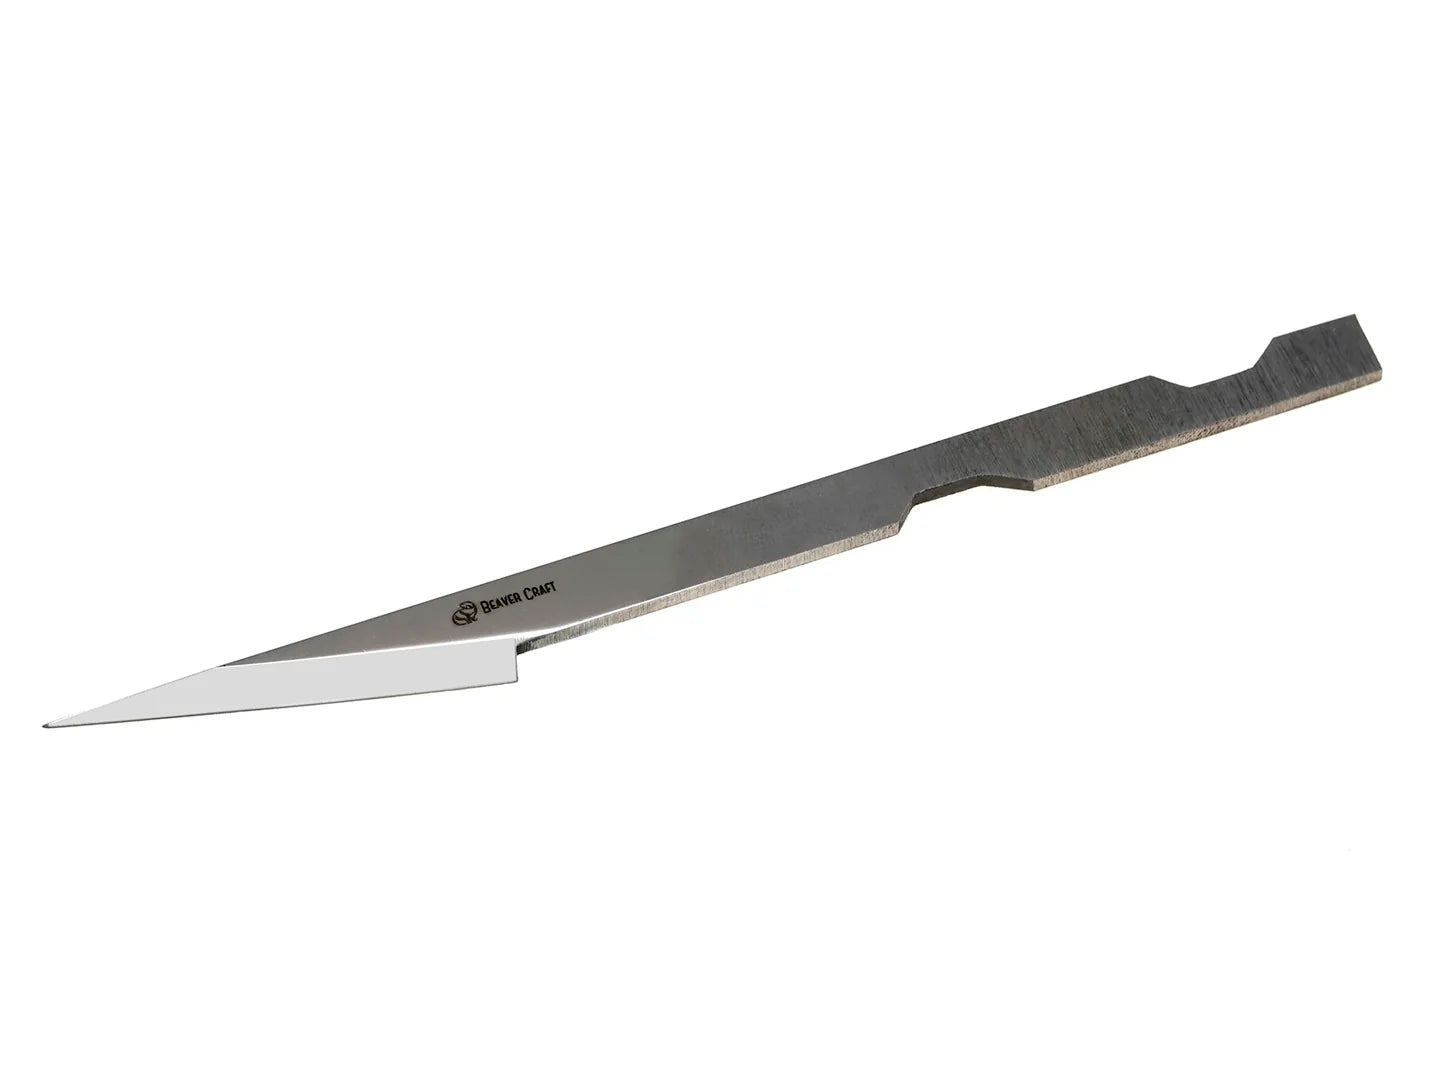 Buy replacement blades carving knife online - BeaverCraft